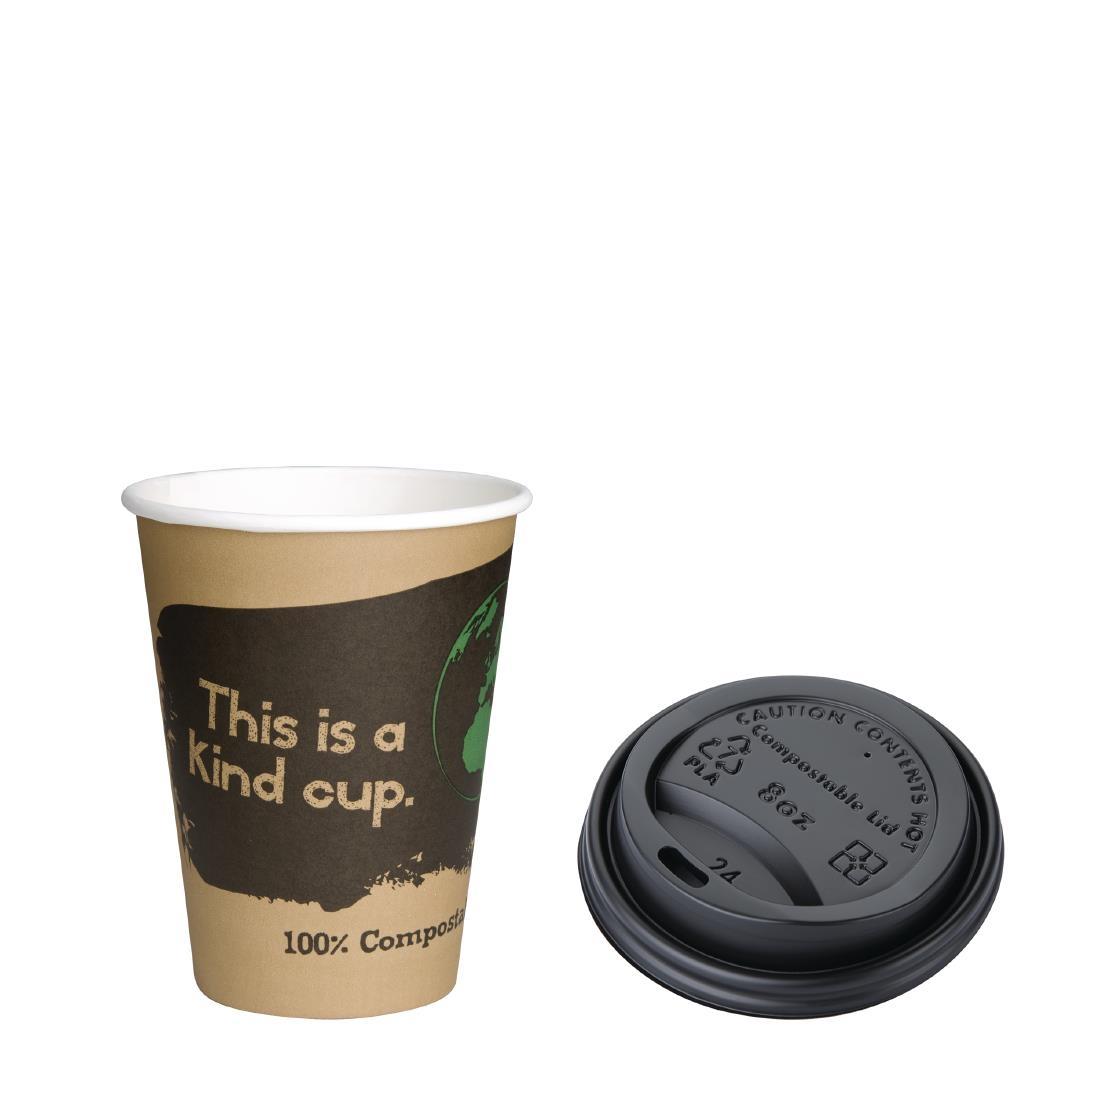 Fiesta Green 8oz Compostable Hot Cups and Lids Bundle (Pack of 50) - SA483  - 1